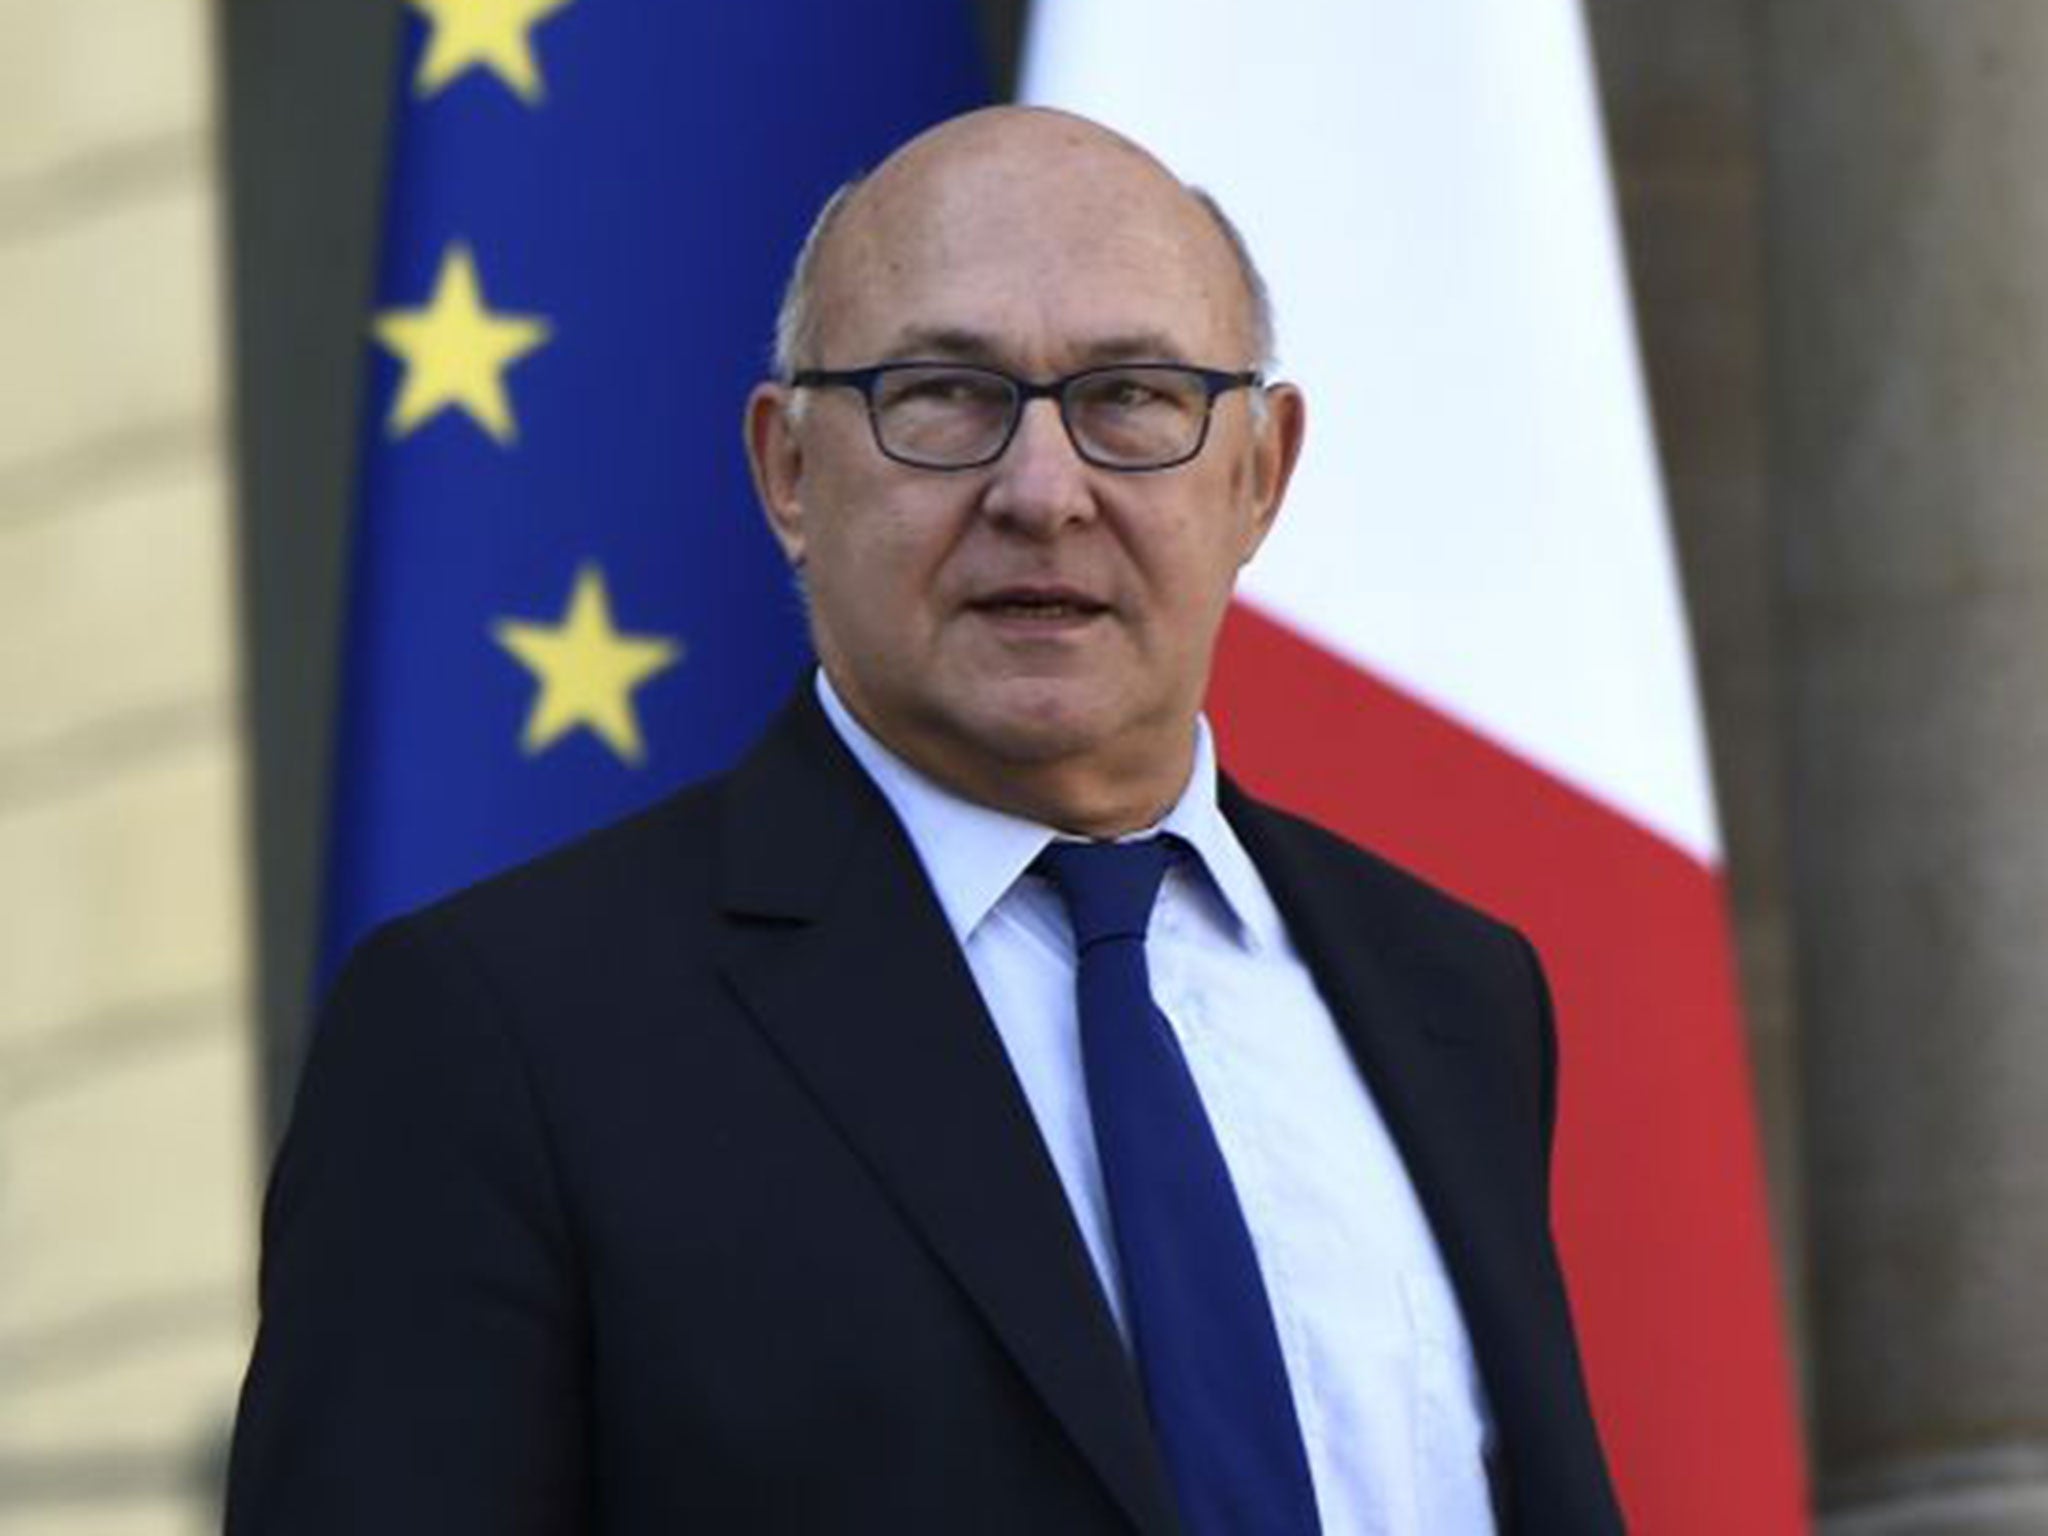 Michel Sapin said he had apologised to the journalist involved